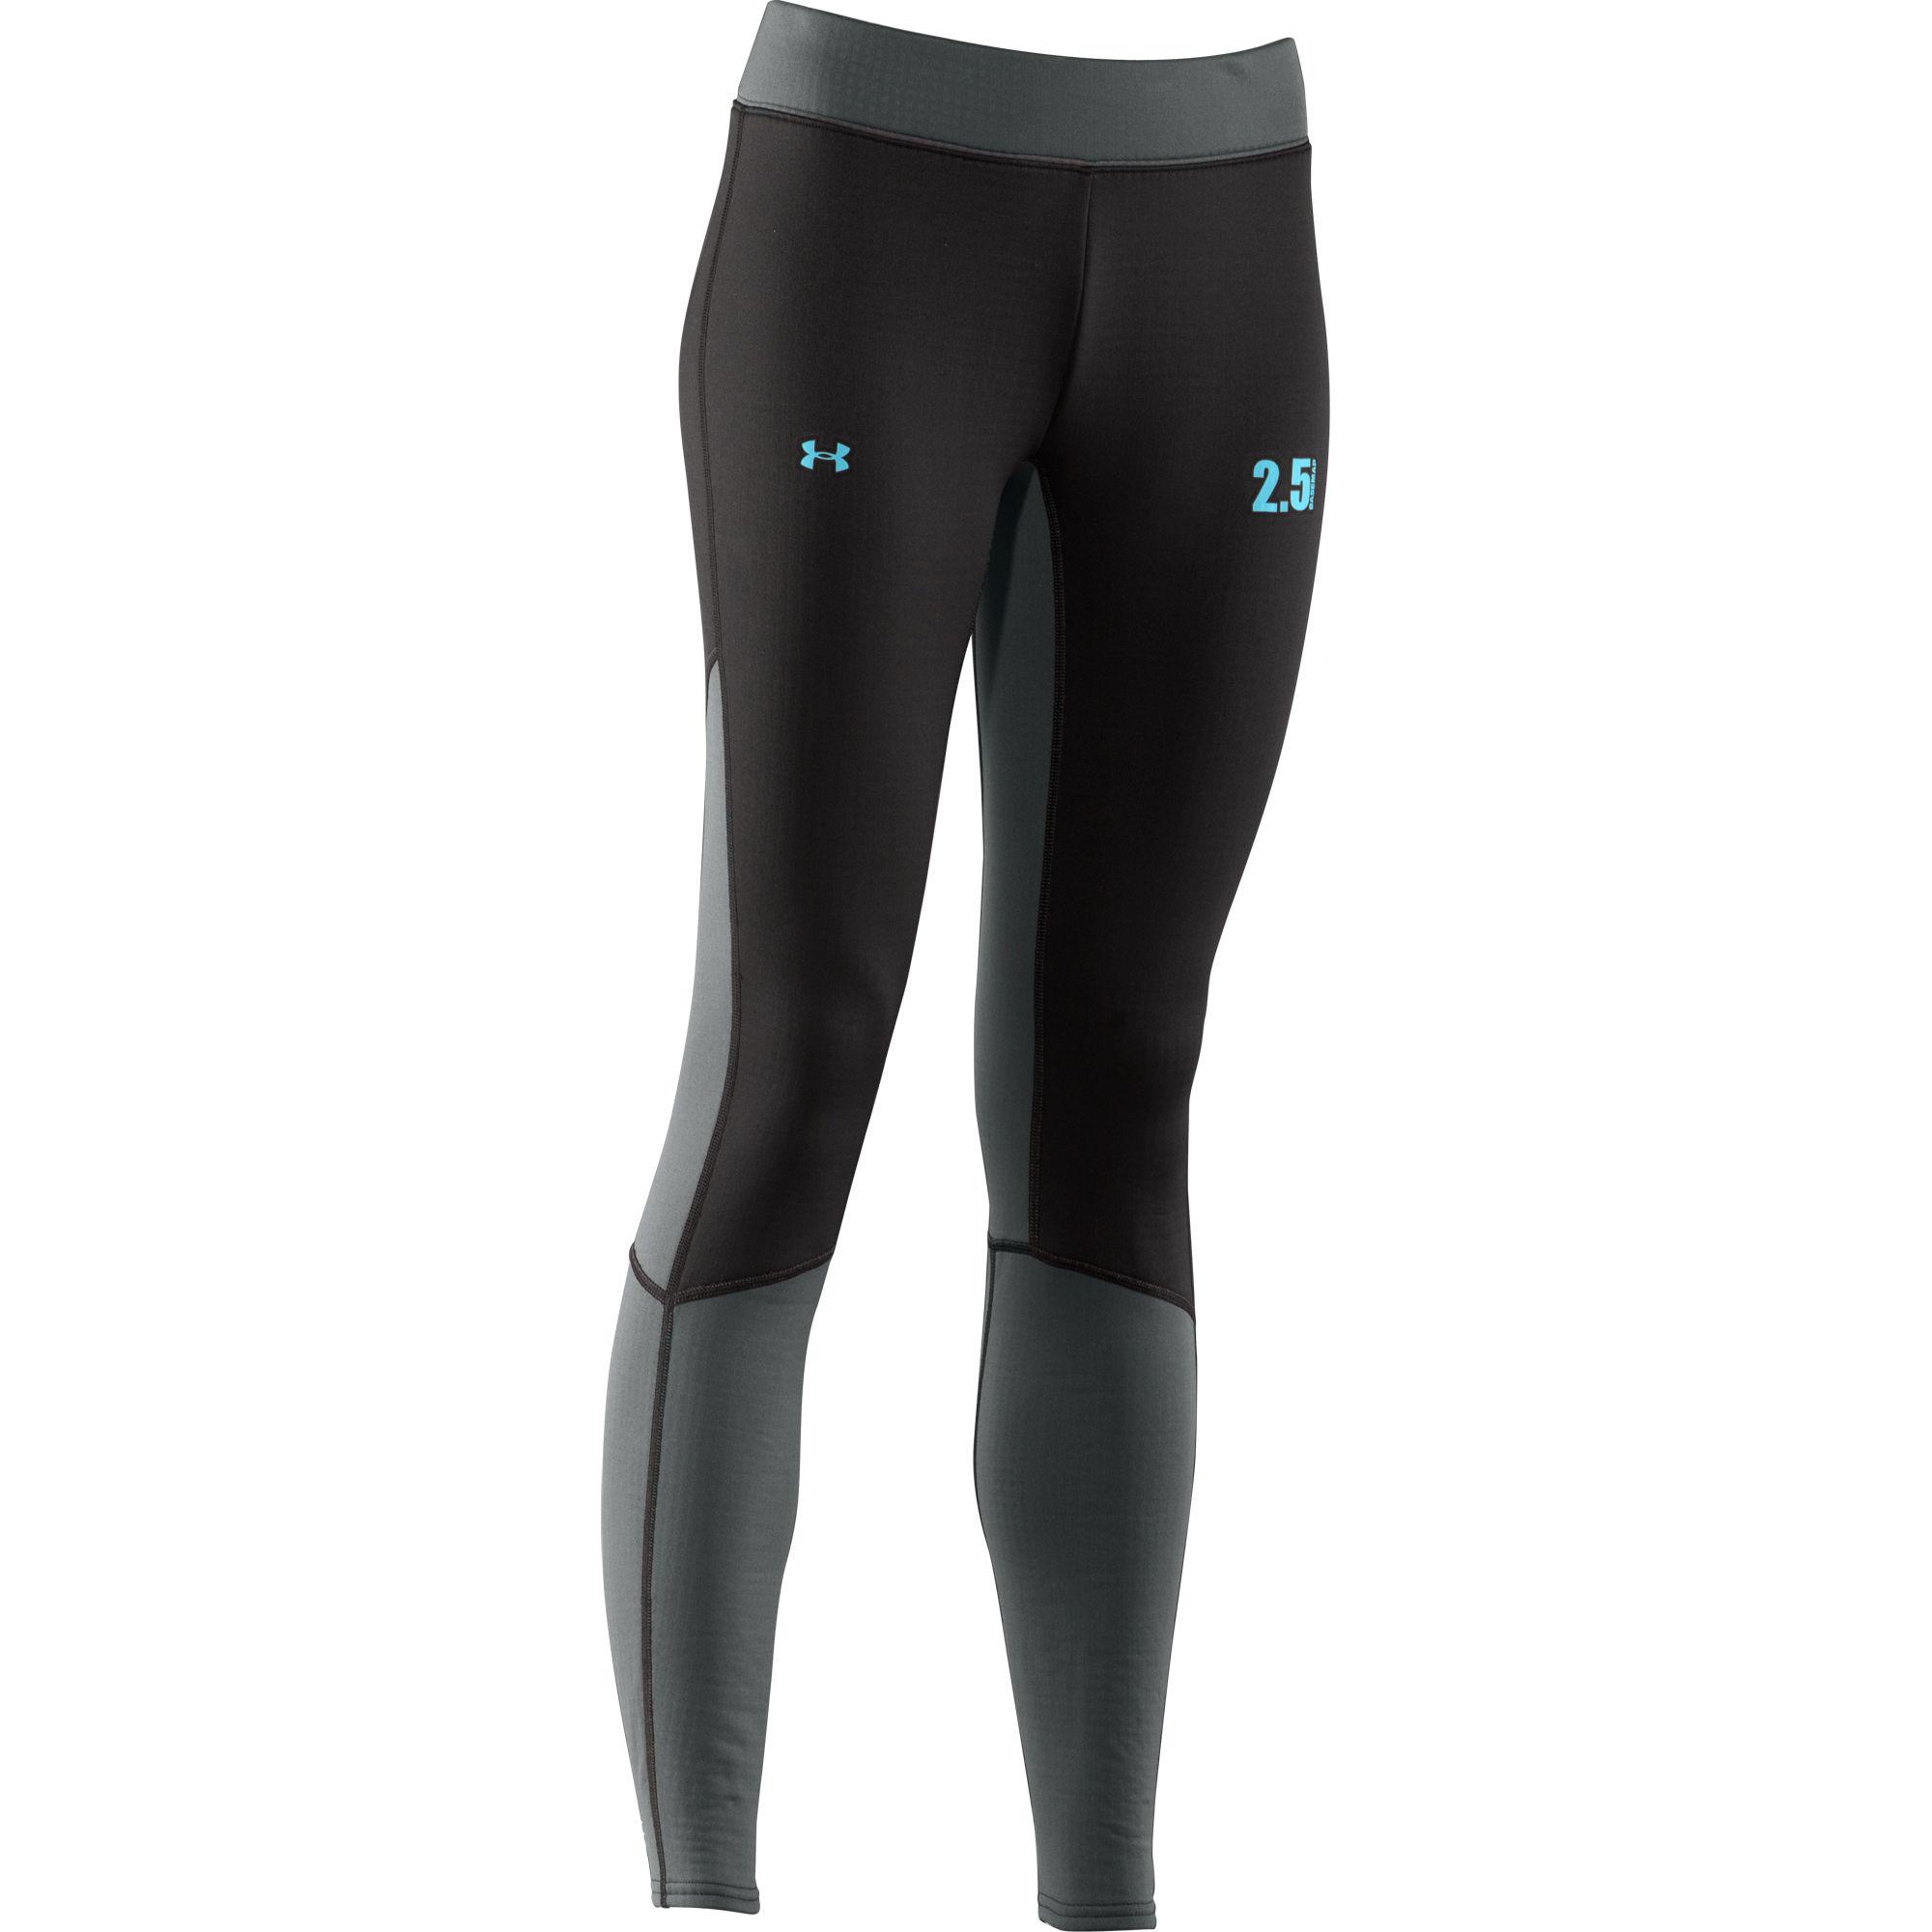 Foto Mallas largas para mujer Under Armour - Base Map 2.5 - Extra Large